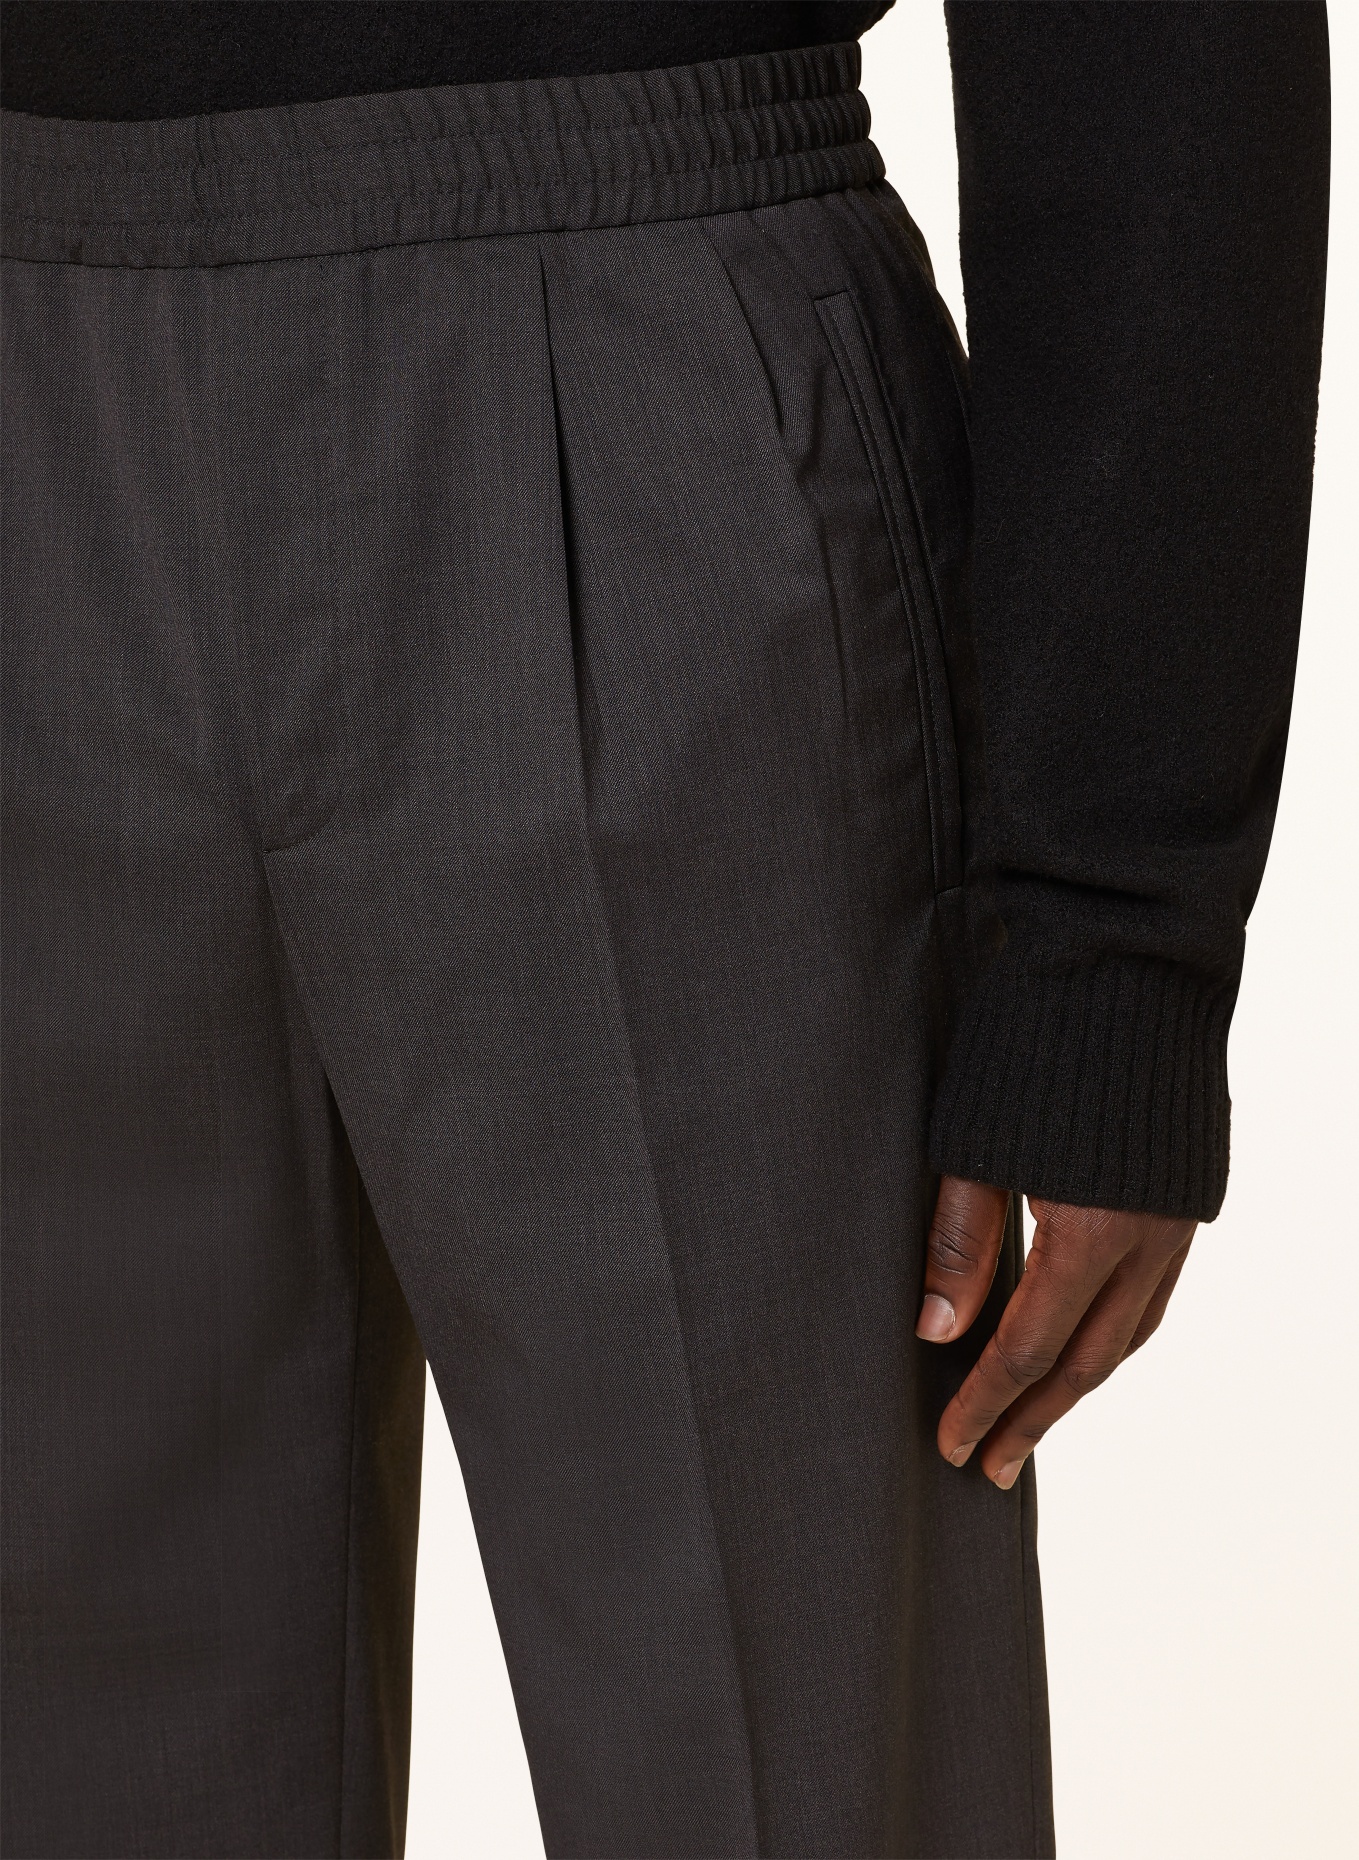 ZEGNA Pants in jogger style extra slim fit, Color: 3A7 Anthra (Image 5)